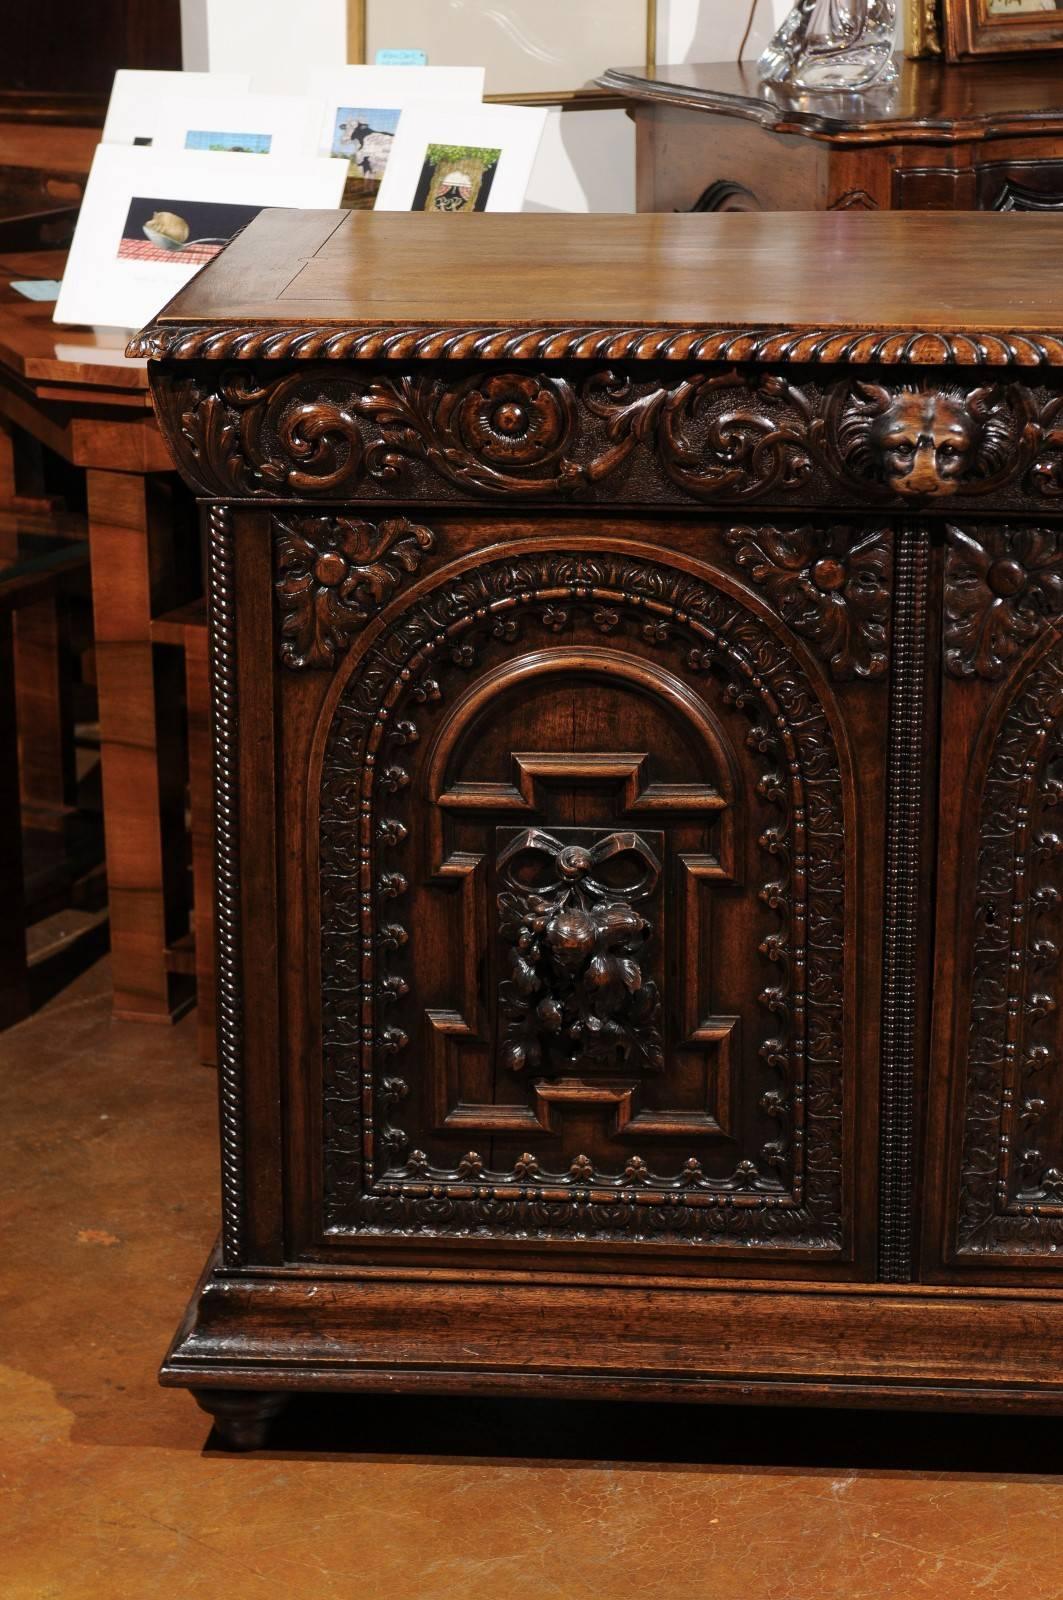 A French Renaissance Revival richly carved walnut two-door buffet from the mid-19th century. This French carved walnut buffet was born in the early years of the reign of Emperor Napoleon III, at a time when the Neo-Renaissance style was becoming